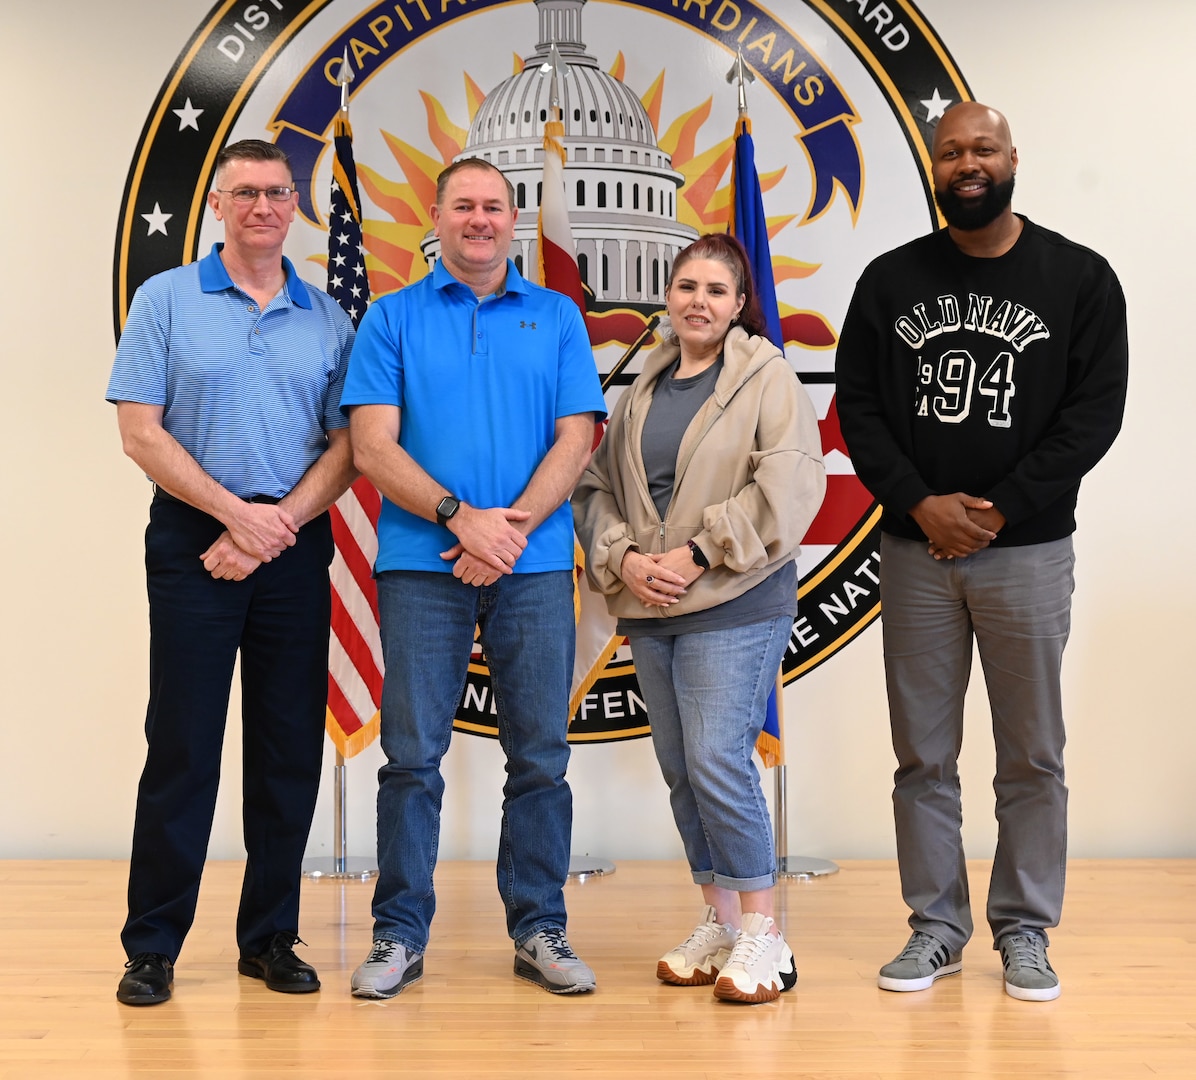 From left, Mr. Joseph Althoff, Integrated Primary Prevention Manager; Mr. Jason Dickson, DCANG Prevention Coordinator, Ms. Juliann Bryant, DCANG Prevention Analyst, and Mr. Karlus Madison, DCARNG Prevention Analyst, stand for a photograph following a meeting at Joint Base Andrews, April 5, 2024. The District of Columbia National Guard's Integrated Resilience Operations (IRO) program equips the organization with the knowledge, skills, tools and resources required to continually assess and adjust mitigation plans for unit commanders and senior leaders of the D.C. National Guard geared toward identifying where the organization succeeds and where there's challenges.